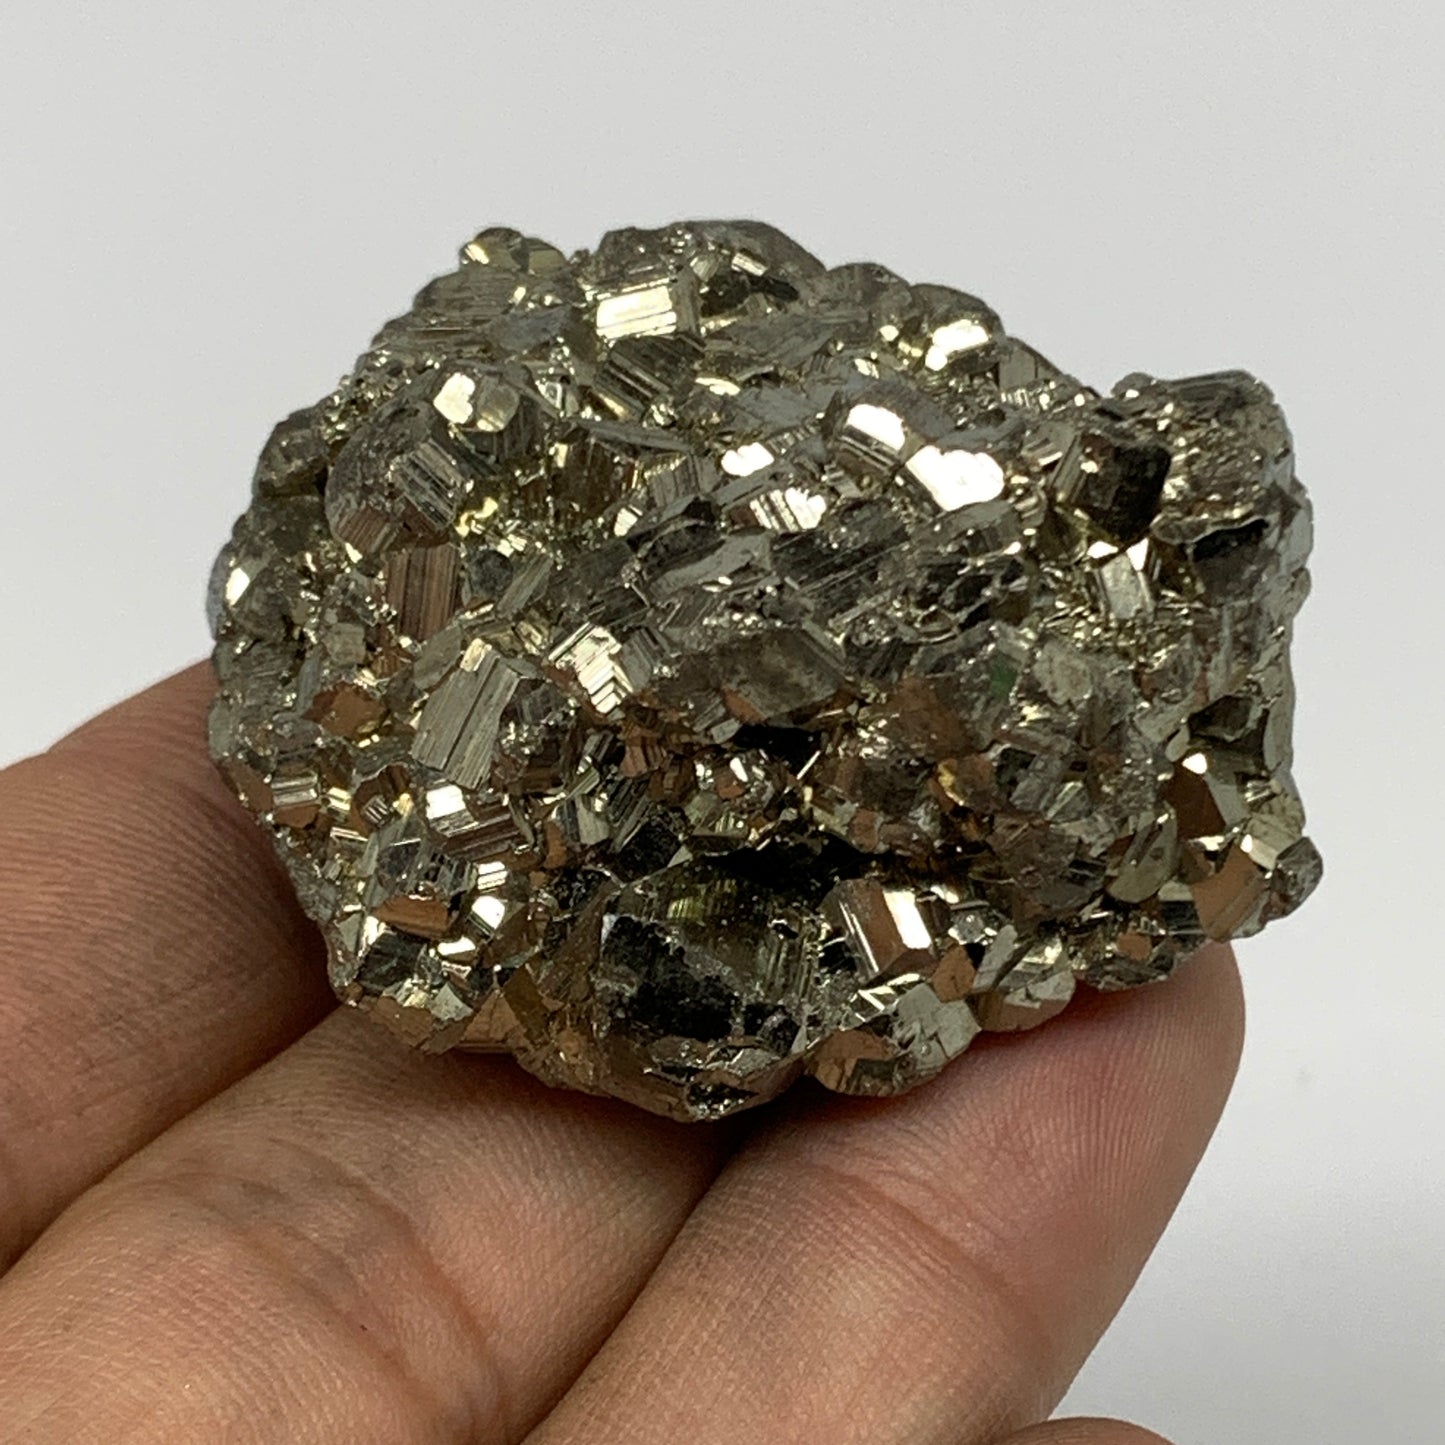 87.1g, 1.7"x1.5"x1.1", Natural Untreated Pyrite Cluster Mineral Specimens,B19366